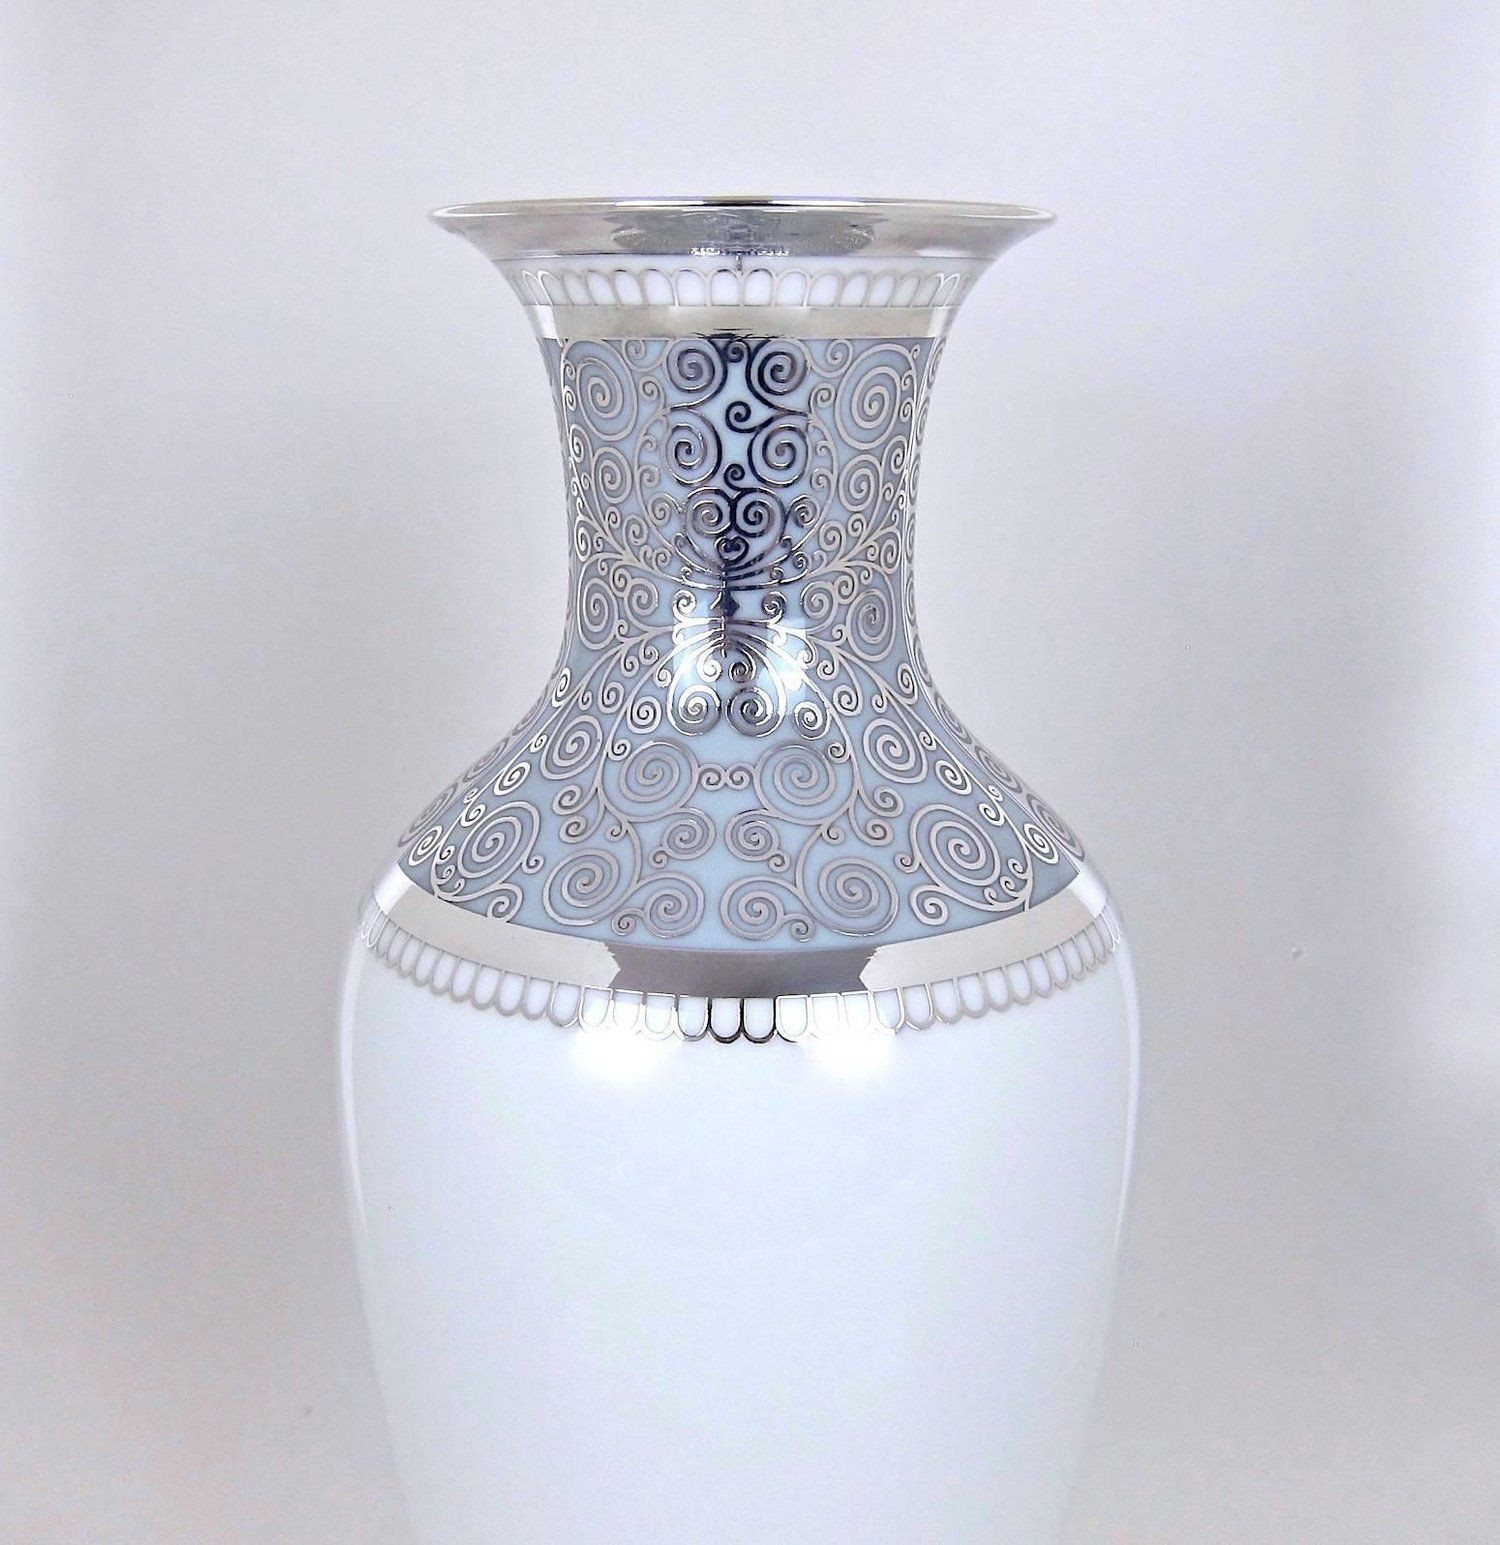 27 Lovable Milk Glass Vases for Sale 2024 free download milk glass vases for sale of 18 mid century glass vase the weekly world with regard to 18 mid century glass vase